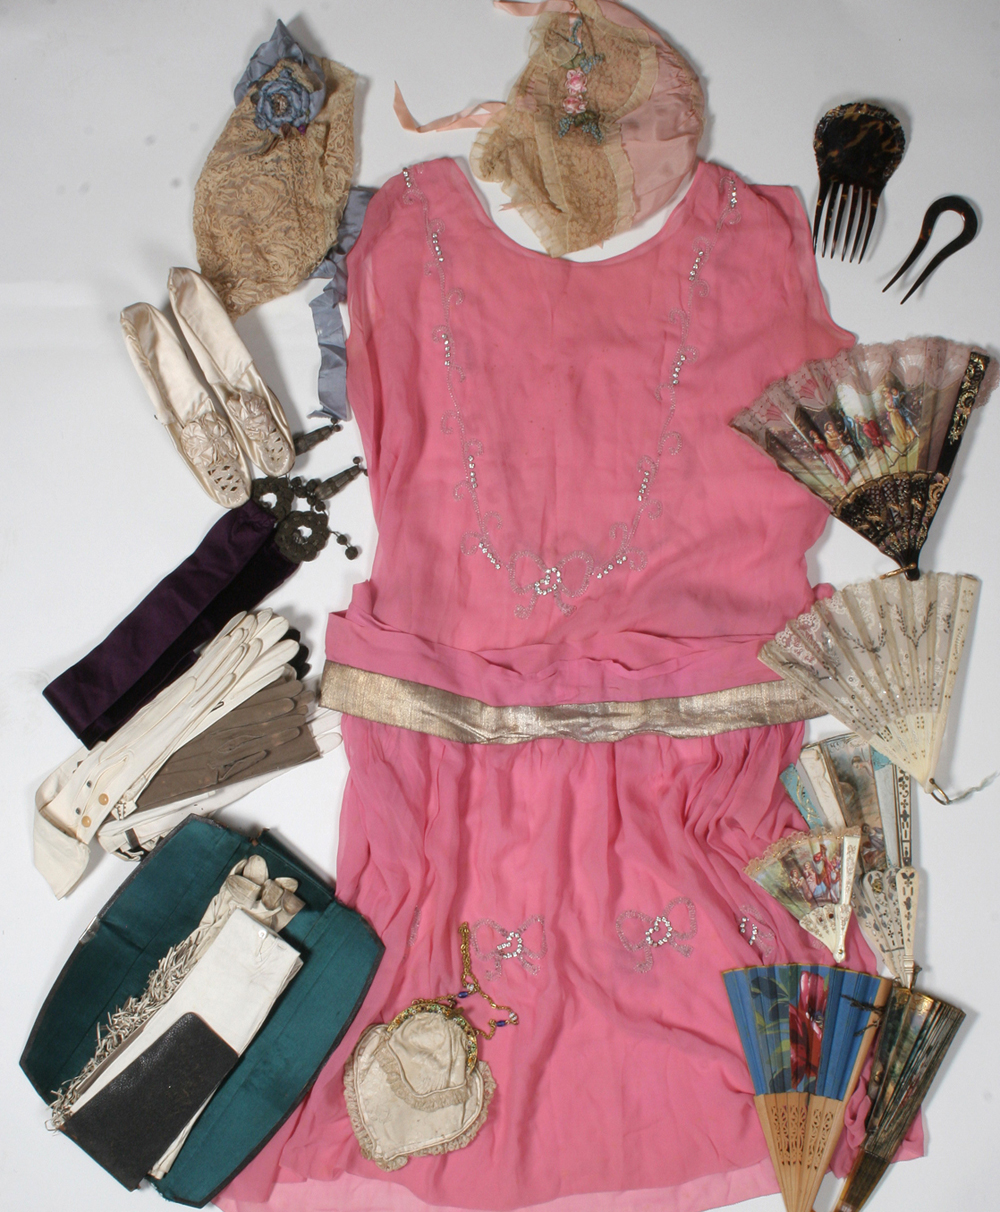 A group of lady’s dress and accessories, late 19th/early 20th century, including a 1920s pink